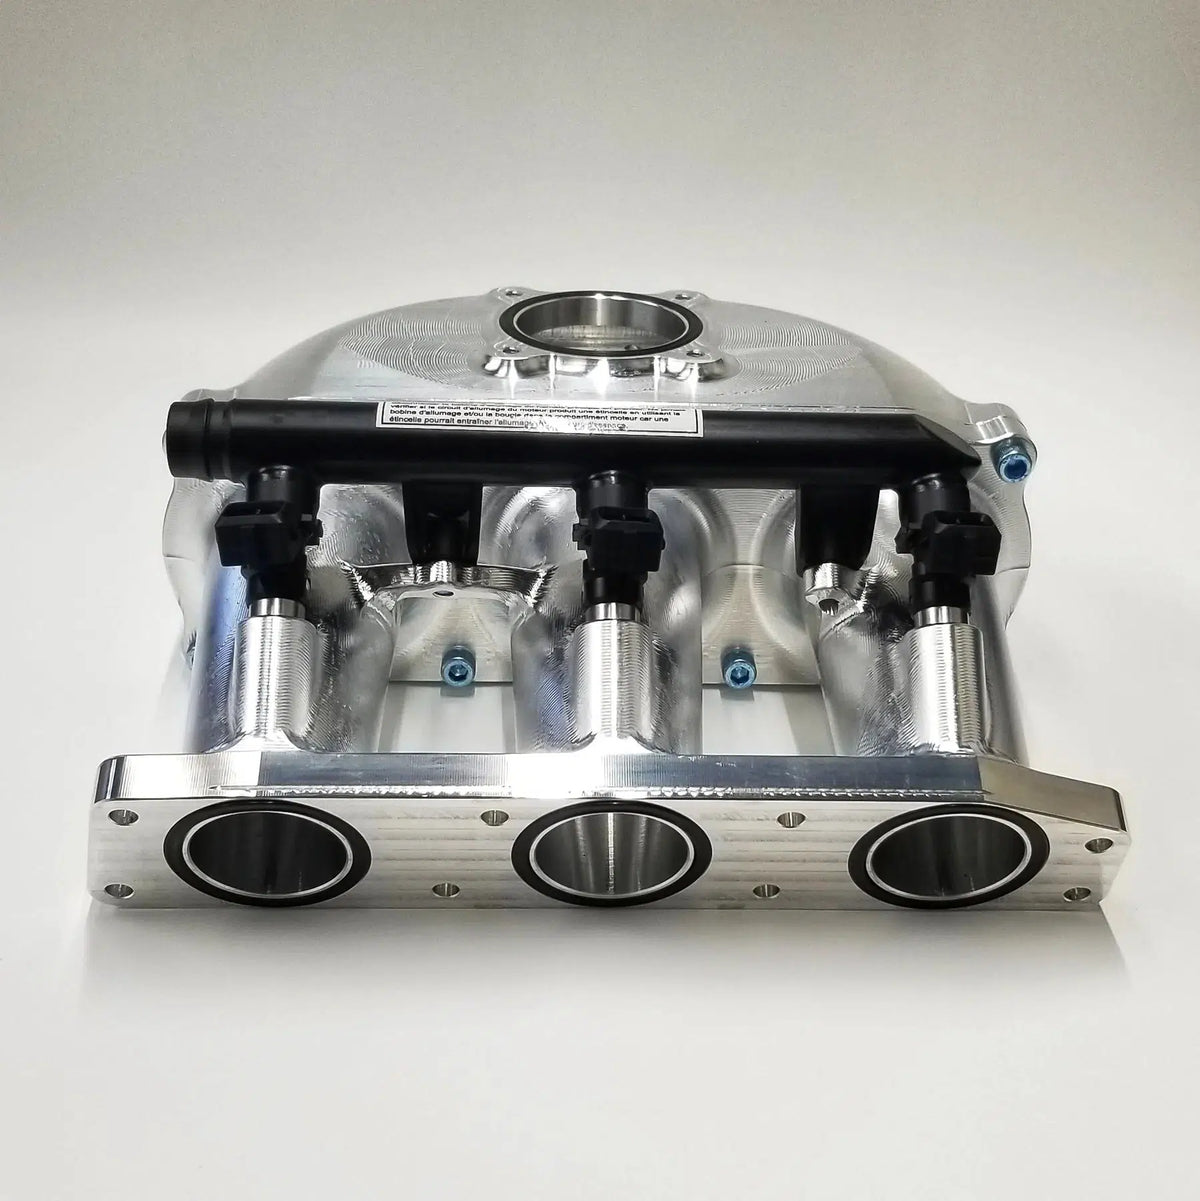 CAN-AM X3 BILLET INTAKE PLENUM SYSTEMS-Intake Plenum-Larue-3 Injectors for Stock Throttle Body-Without Charge Pipe-2020 or Newer (2.25&quot; Intercooler Outlet)-Black Market UTV